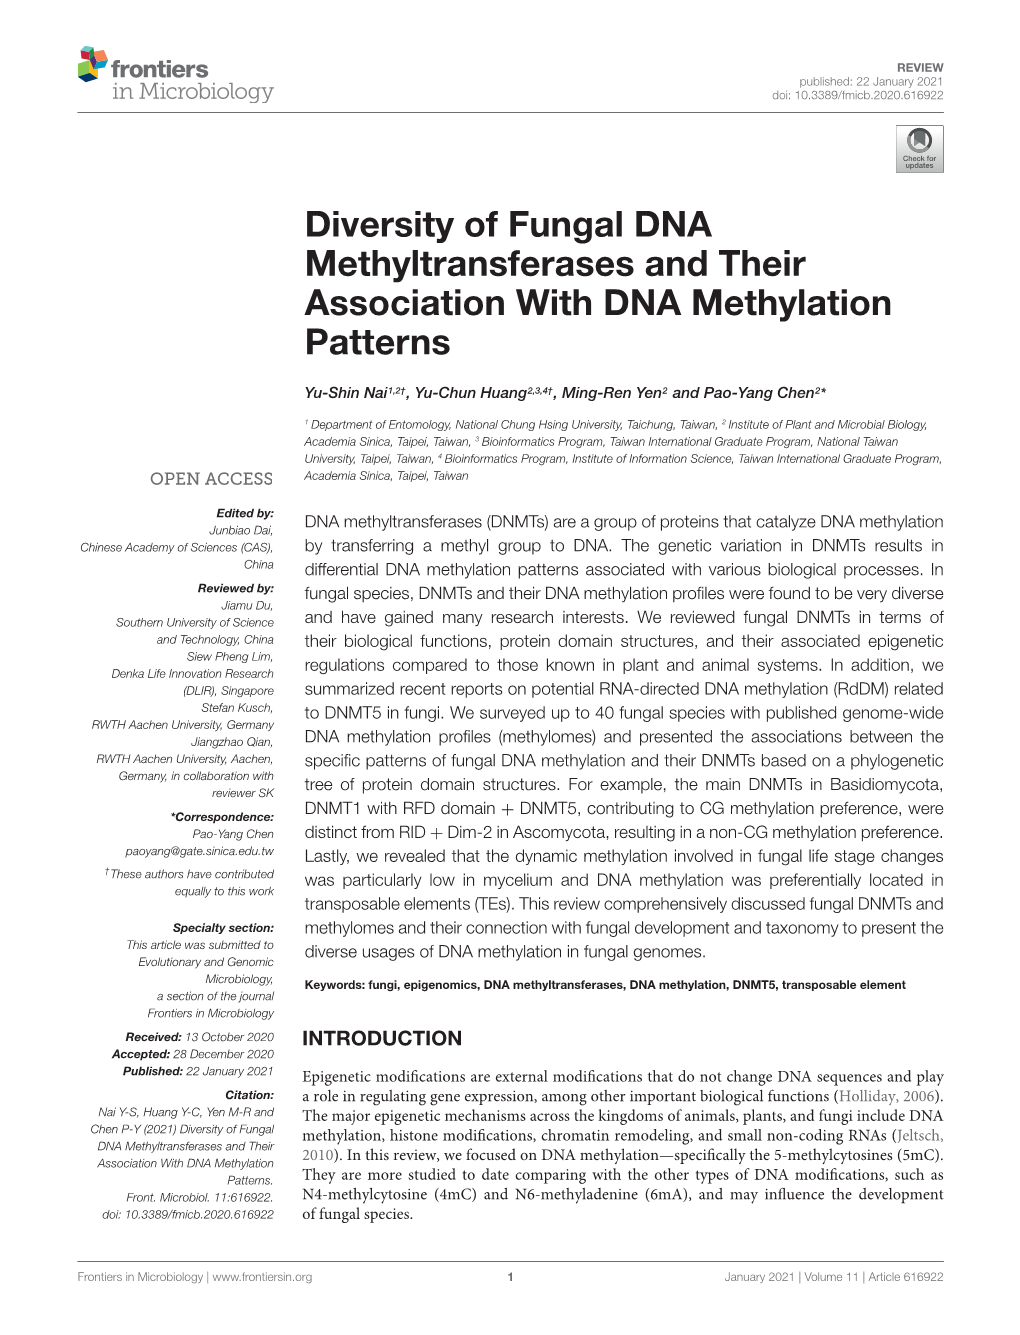 Diversity of Fungal DNA Methyltransferases and Their Association with DNA Methylation Patterns